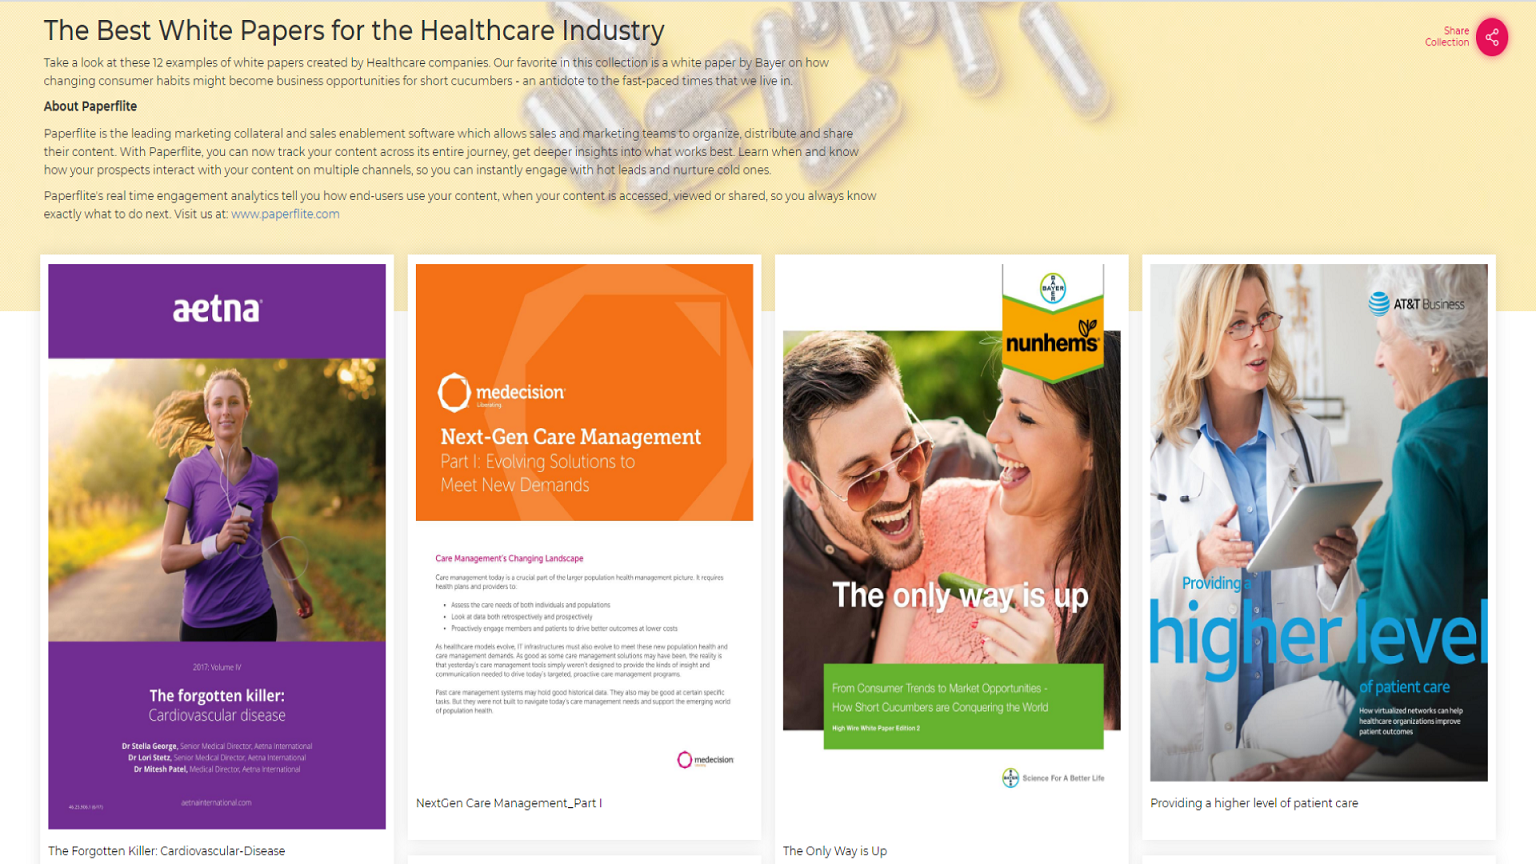 The Best White Papers for the Healthcare Industry